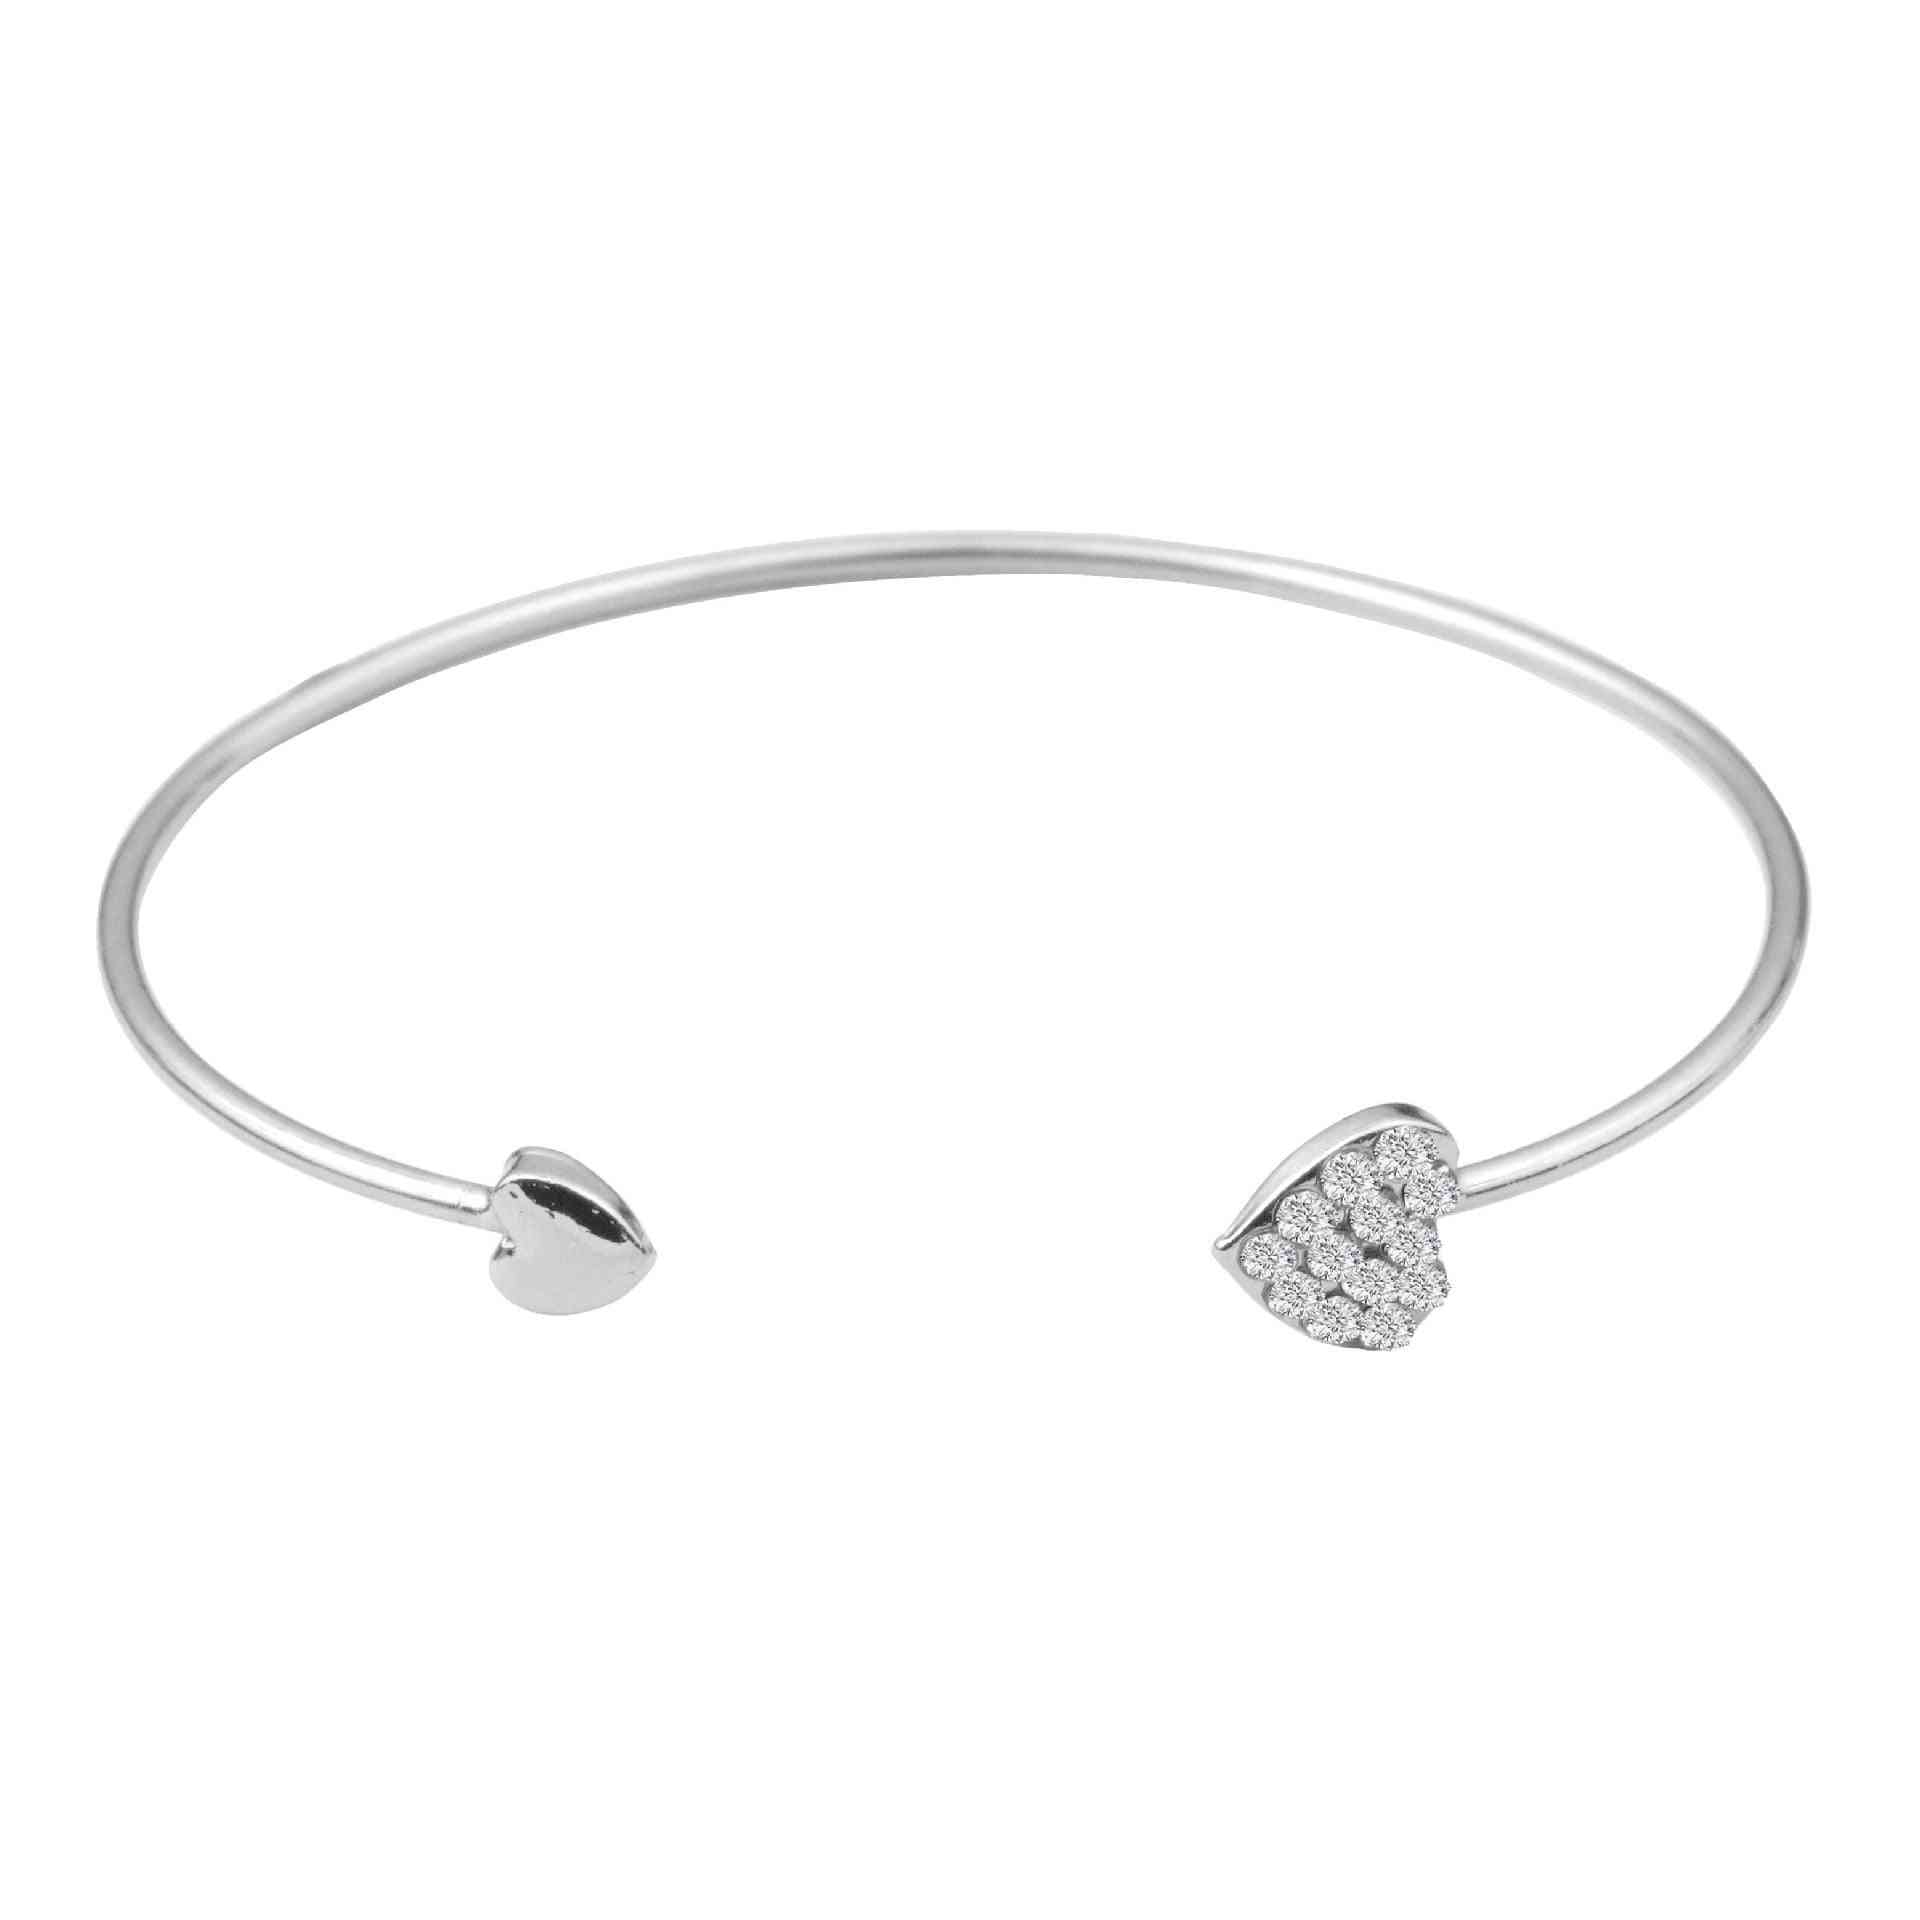 Adjustable Double-heart Bow, Crystal Cuff, Opening Bracelet